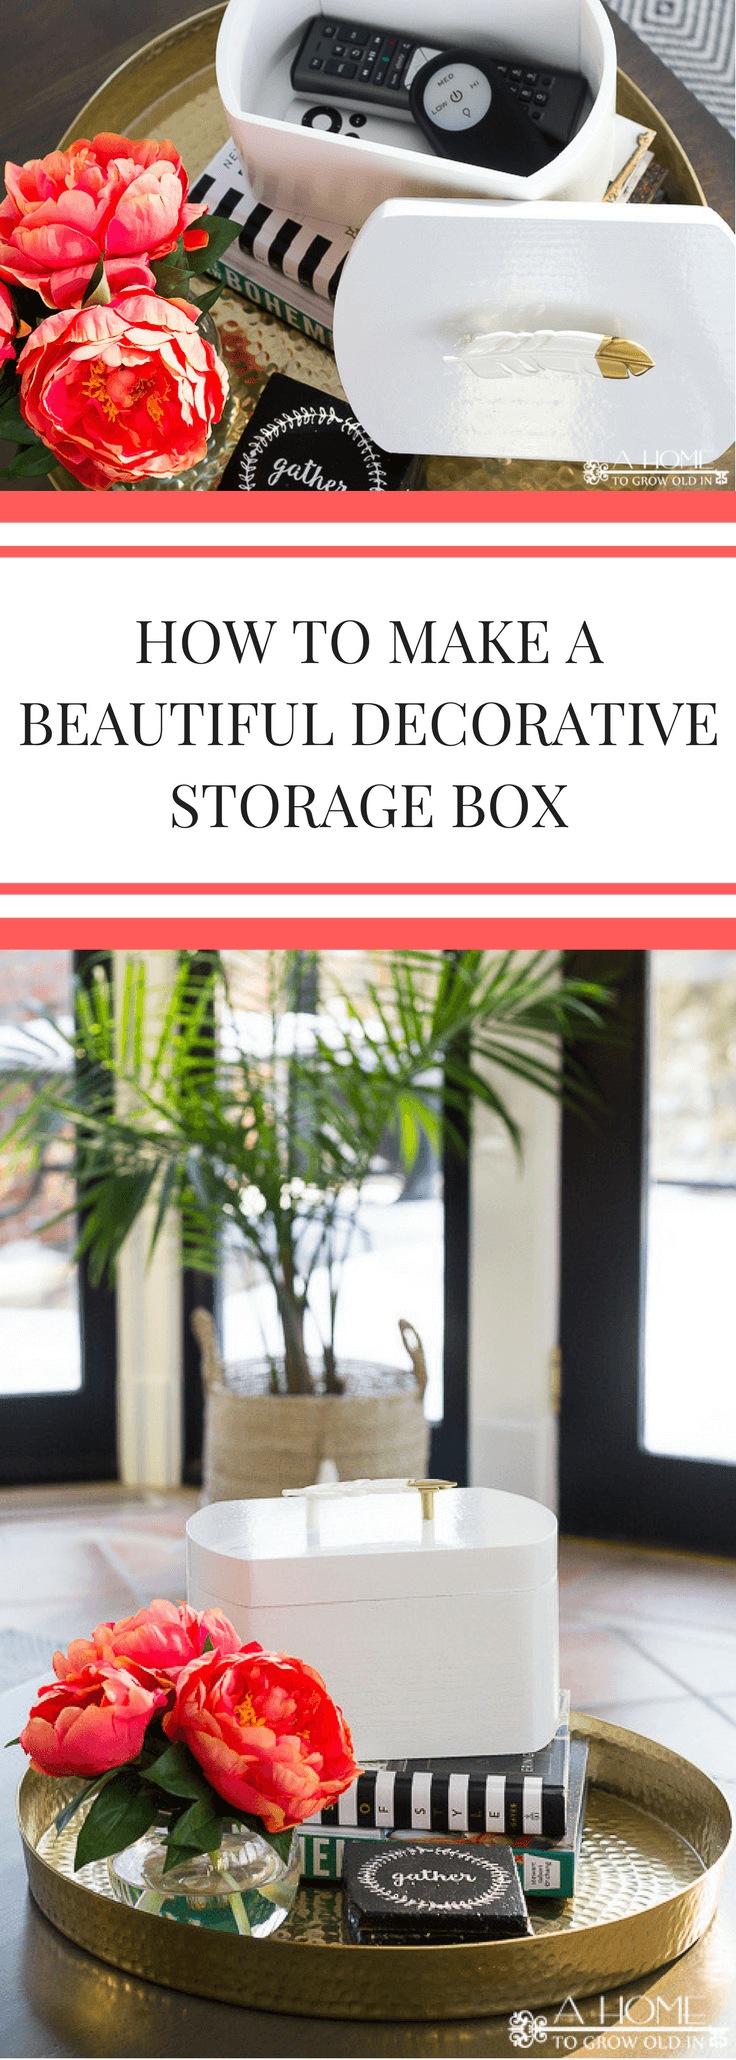 You won't believe just how easy it is to make a pretty decorative box to store all the small items around your home that you don't know what to do with! I love all the different ways you can decorate them! This is one you'll want to pin for later!